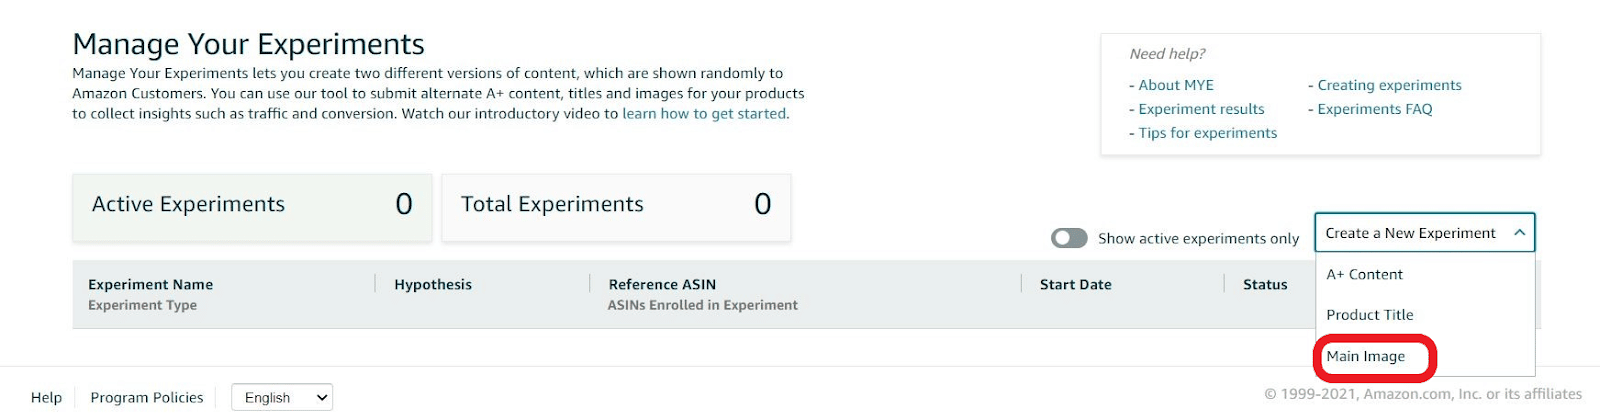 screenshot of manage your experiments page